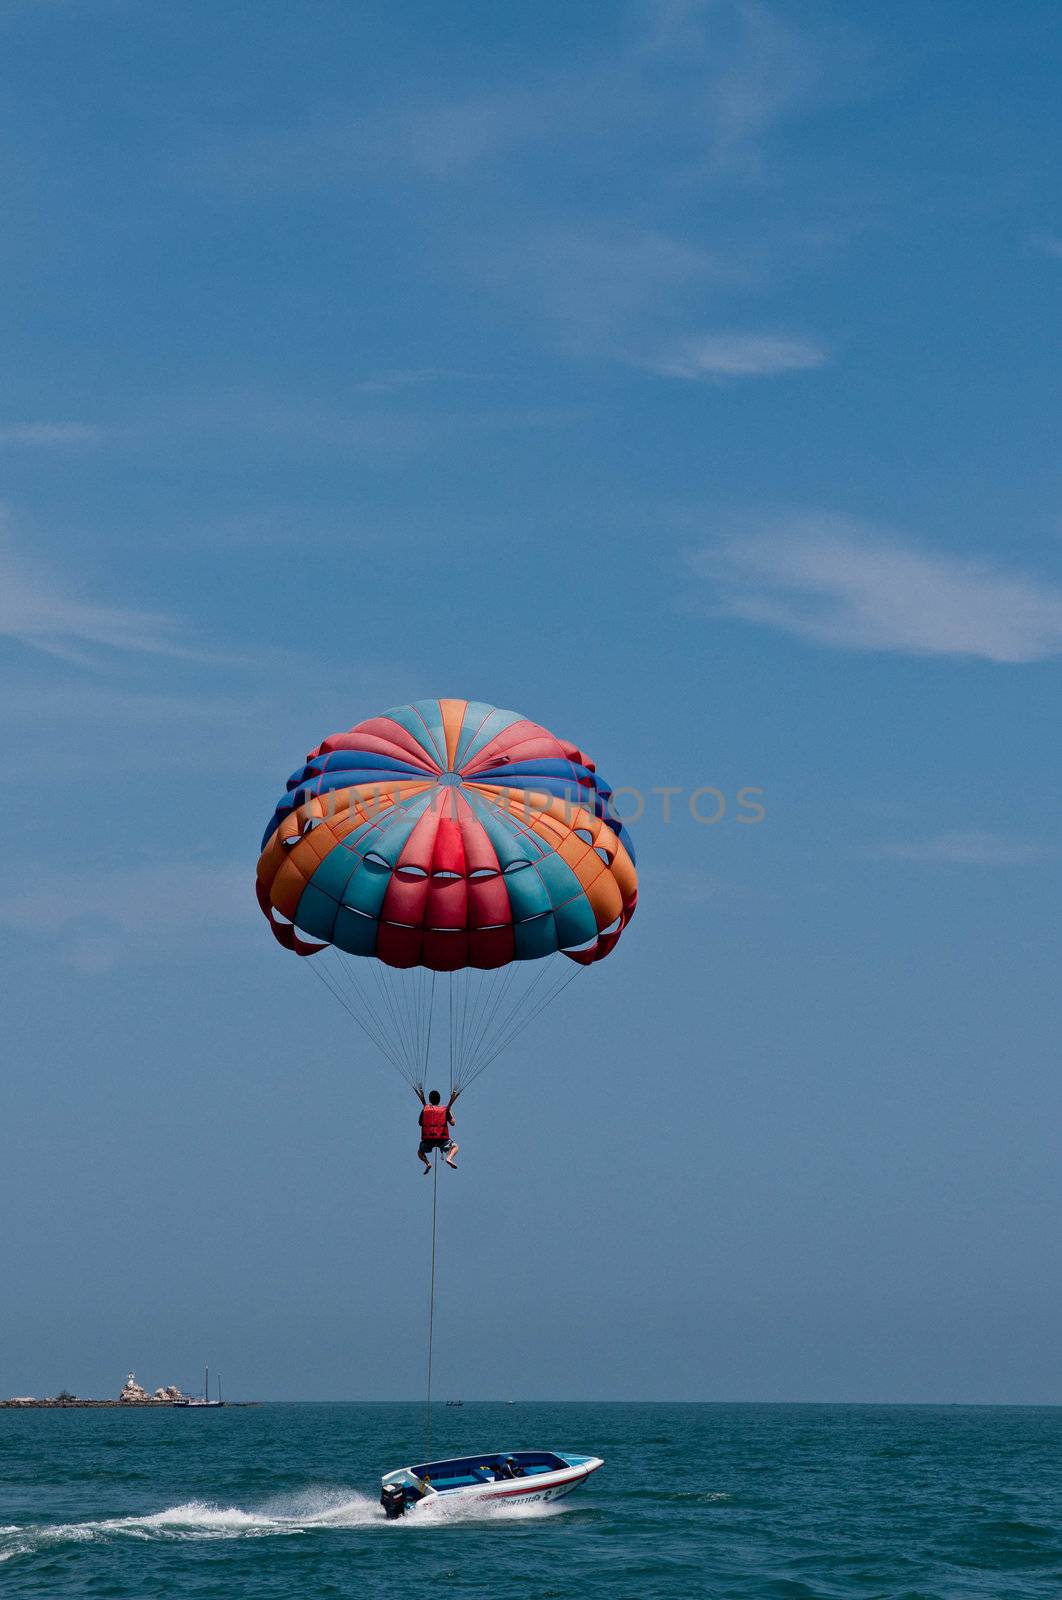 Paraglider launching from the ridge with colorful canopy against a blue sky.